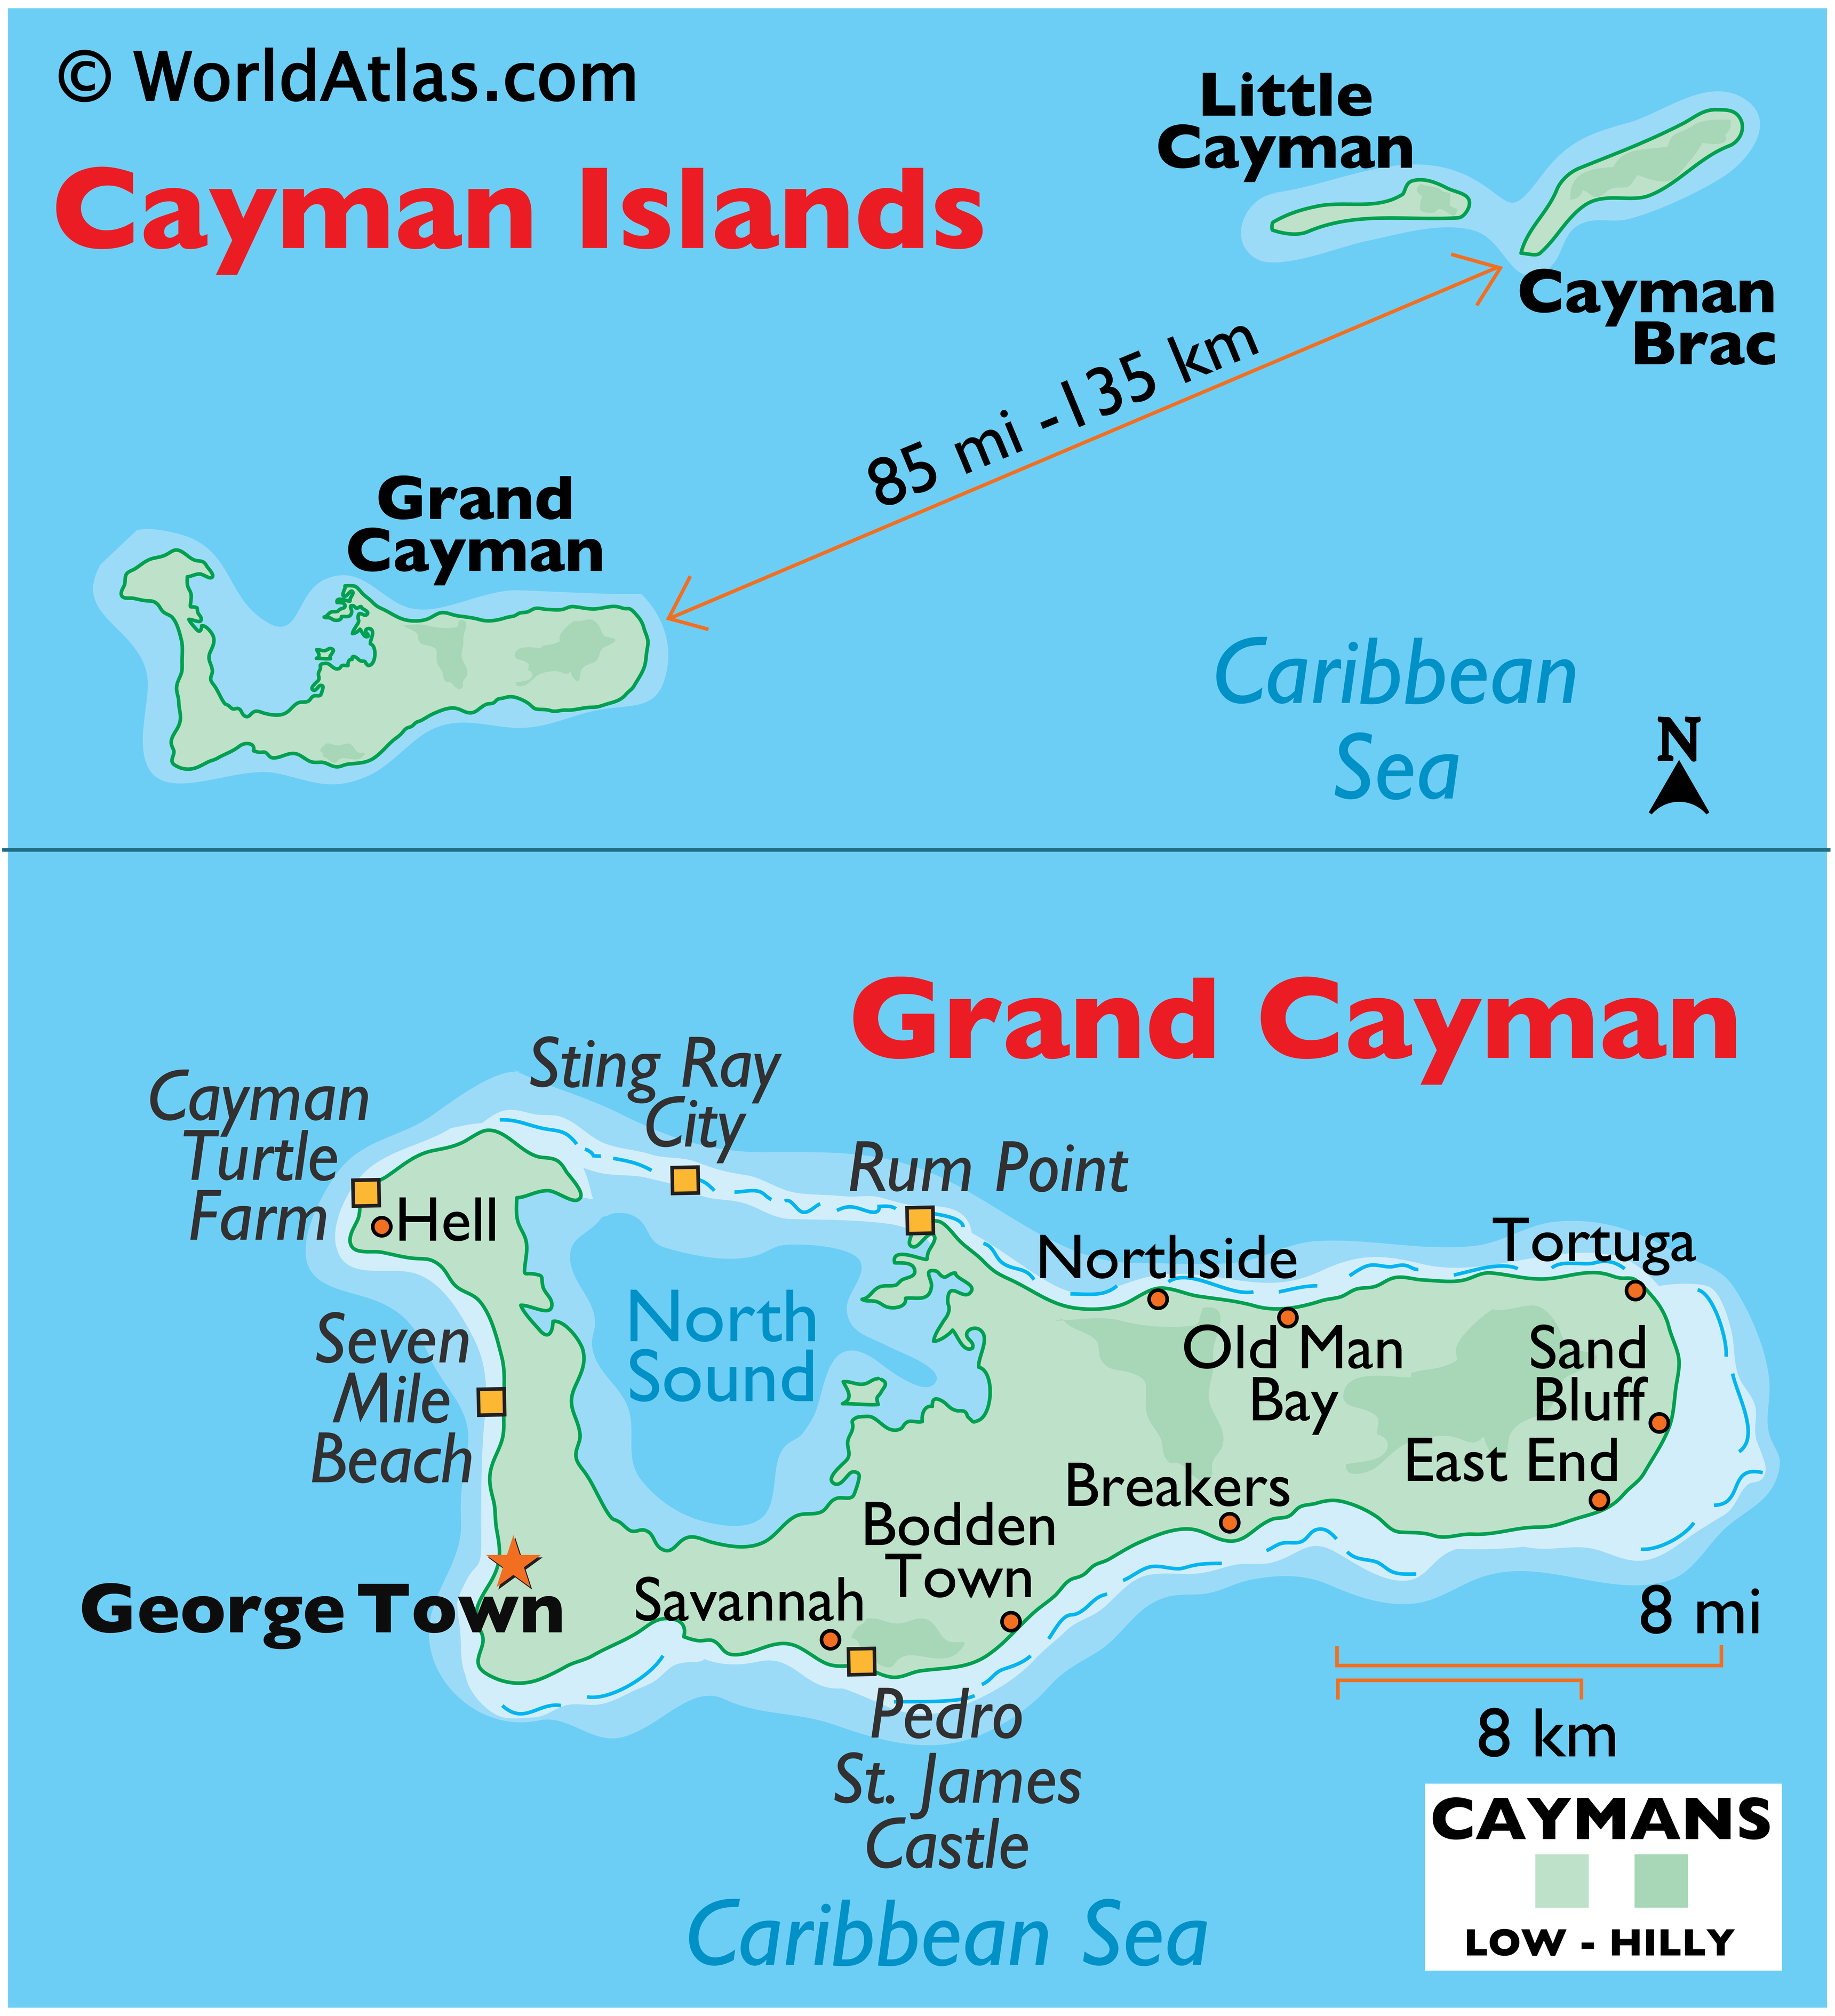 Where can you buy a physical map of the Cayman Islands?